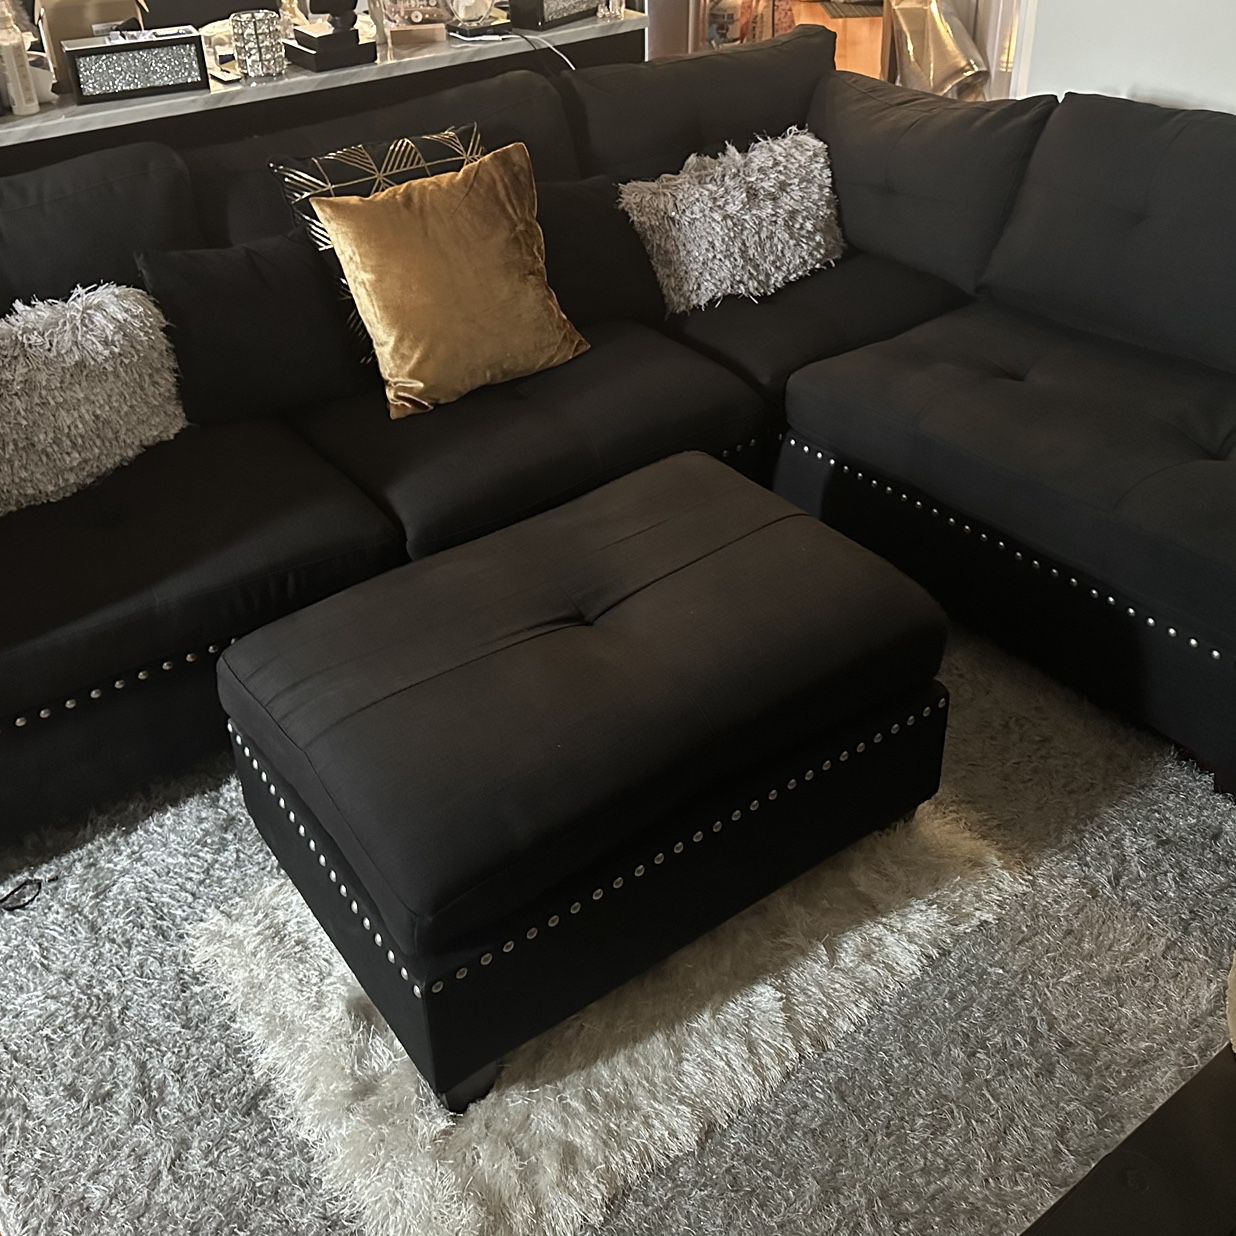 My Second Milani 3 - Piece Upholstered Sectional Couch and ottoman